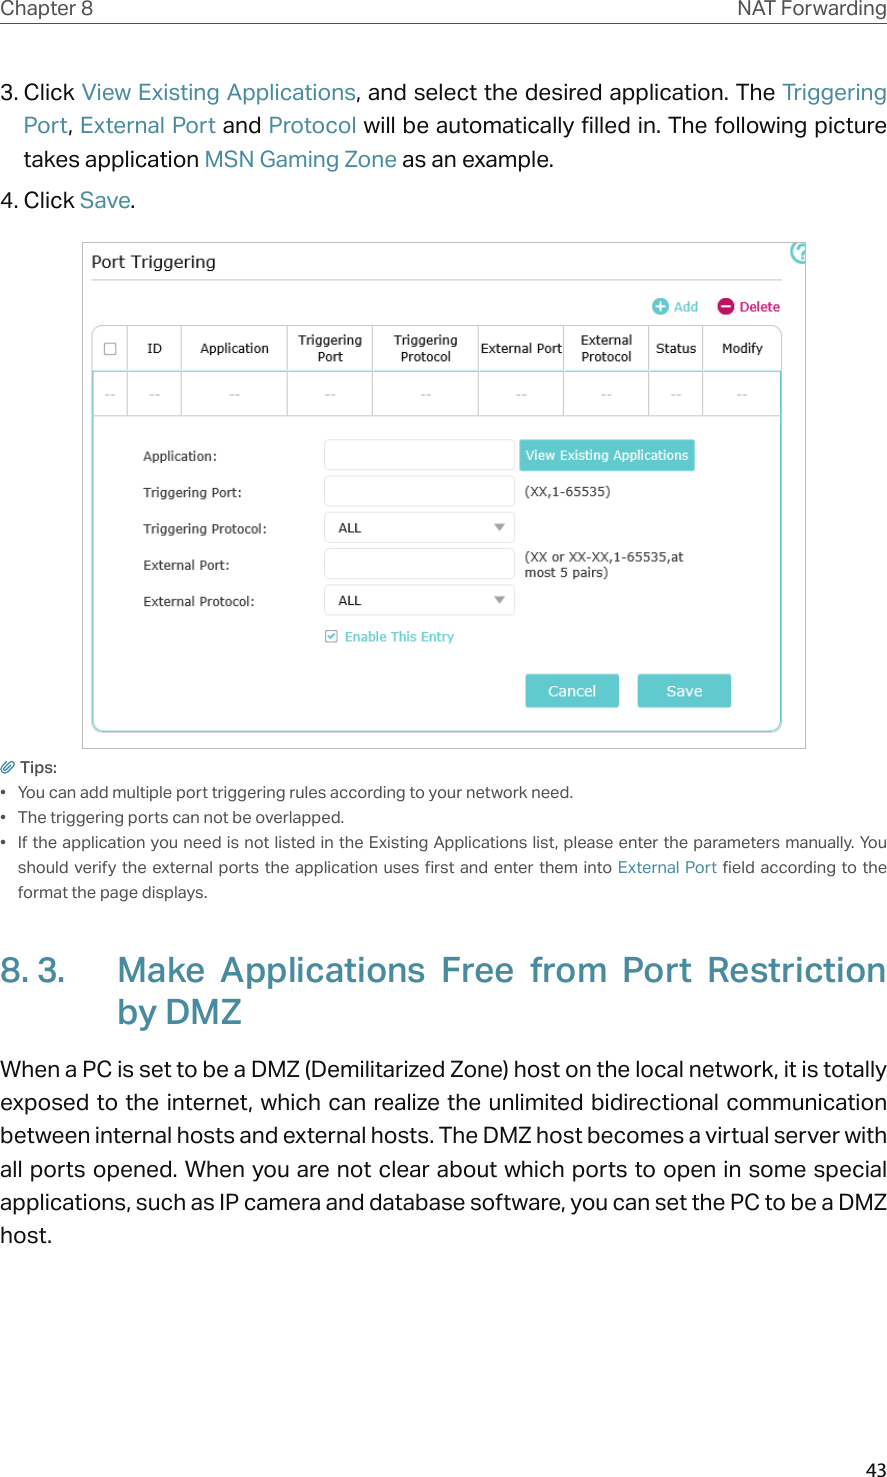 43Chapter 8 NAT Forwarding3. Click View Existing Applications, and select the desired application. The Triggering Port, External Port and Protocol will be automatically filled in. The following picture takes application MSN Gaming Zone as an example.4. Click Save.Tips:•  You can add multiple port triggering rules according to your network need.•  The triggering ports can not be overlapped.•  If the application you need is not listed in the Existing Applications list, please enter the parameters manually. You should verify  the external ports the application  uses first  and enter them  into External Port  field according to  the format the page displays.8. 3.  Make  Applications  Free  from  Port  Restriction by DMZWhen a PC is set to be a DMZ (Demilitarized Zone) host on the local network, it is totally exposed to the internet, which  can realize the unlimited bidirectional communication between internal hosts and external hosts. The DMZ host becomes a virtual server with all ports opened. When you are not clear about which ports to open in some special applications, such as IP camera and database software, you can set the PC to be a DMZ host.